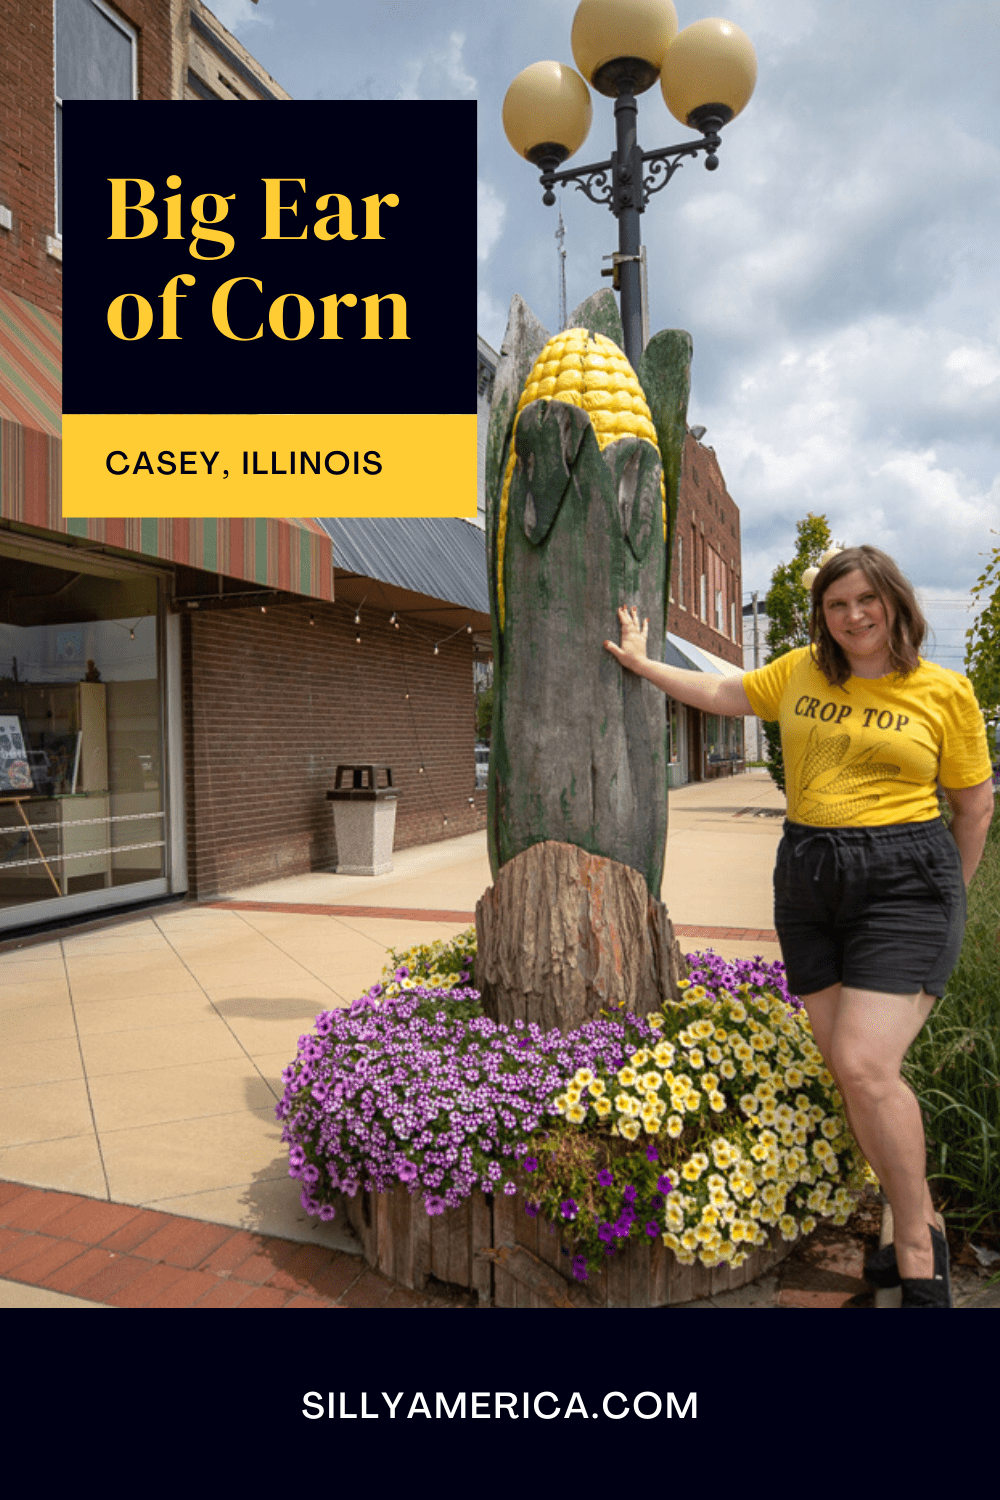 Casey, Illinois is a small town known for its big things. The town is home to over thirty roadside attractions, including twelve record holding world's largest things! The big ear of corn might be one of the smallest big things in Casey, but it's still cream of the crop!  #IllinoisRoadsideAttractions #IllinoisRoadsideAttraction #RoadsideAttractions #RoadsideAttraction #RoadTrip #IllinoisRoadTrip #IllinoisWeekendGetaways #IllinoisWithKids #WorldsLargestThings